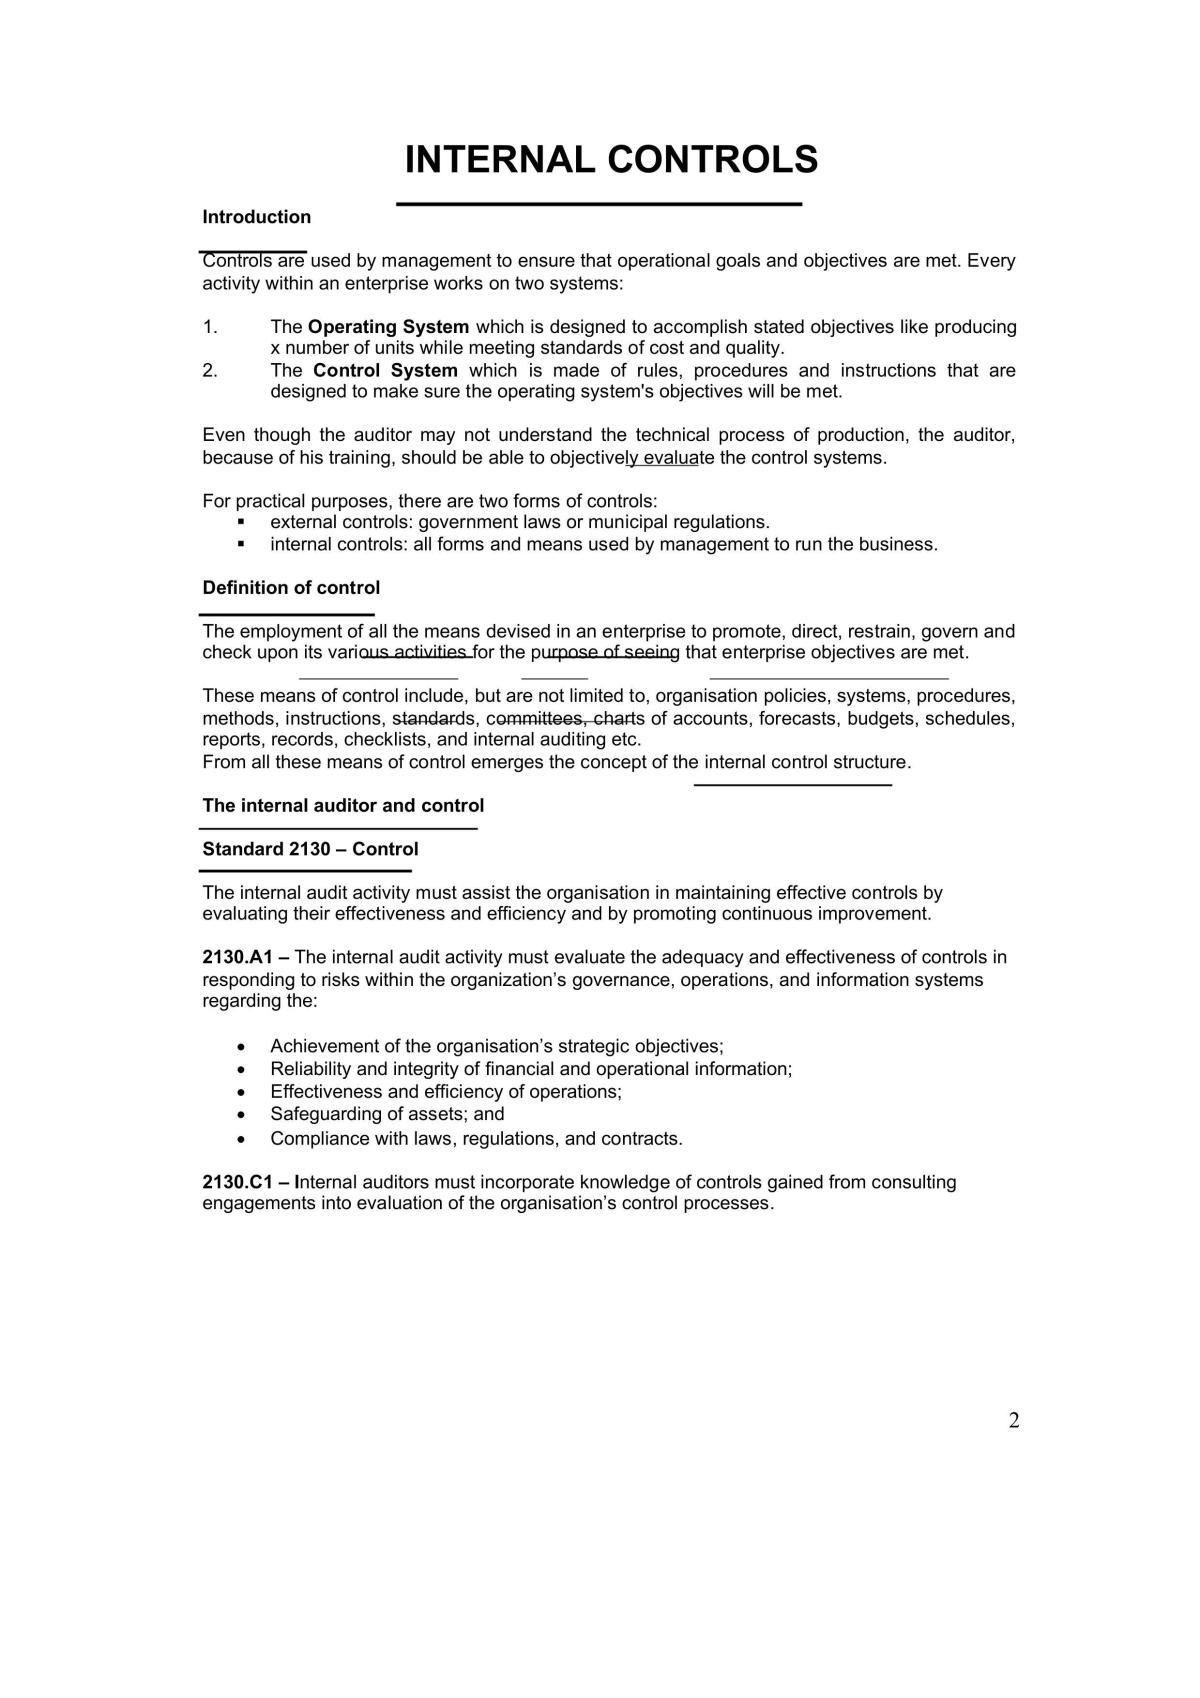 Notes on Internal Controls - Page 3